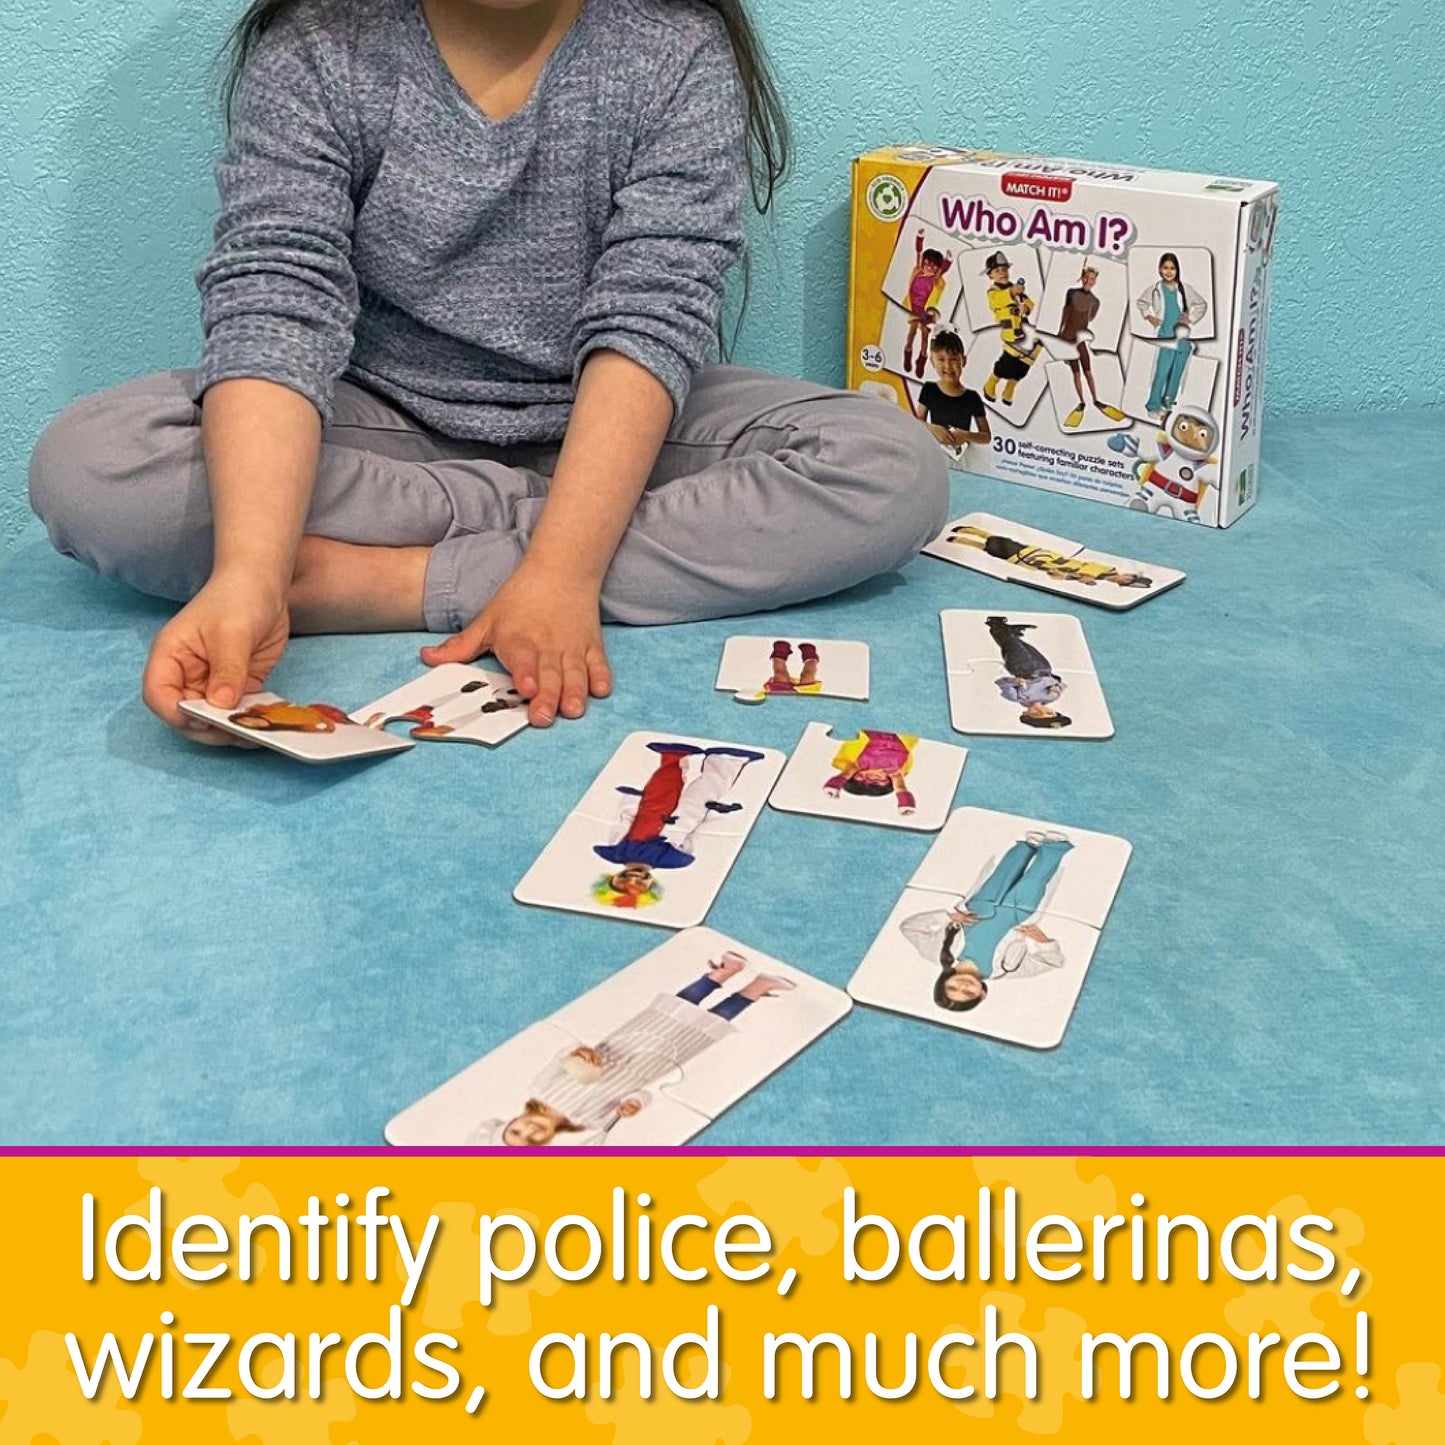 Infographic of little girl playing Match It - Who Am I that says, "Identify police, ballerinas, wizards, and much more!"